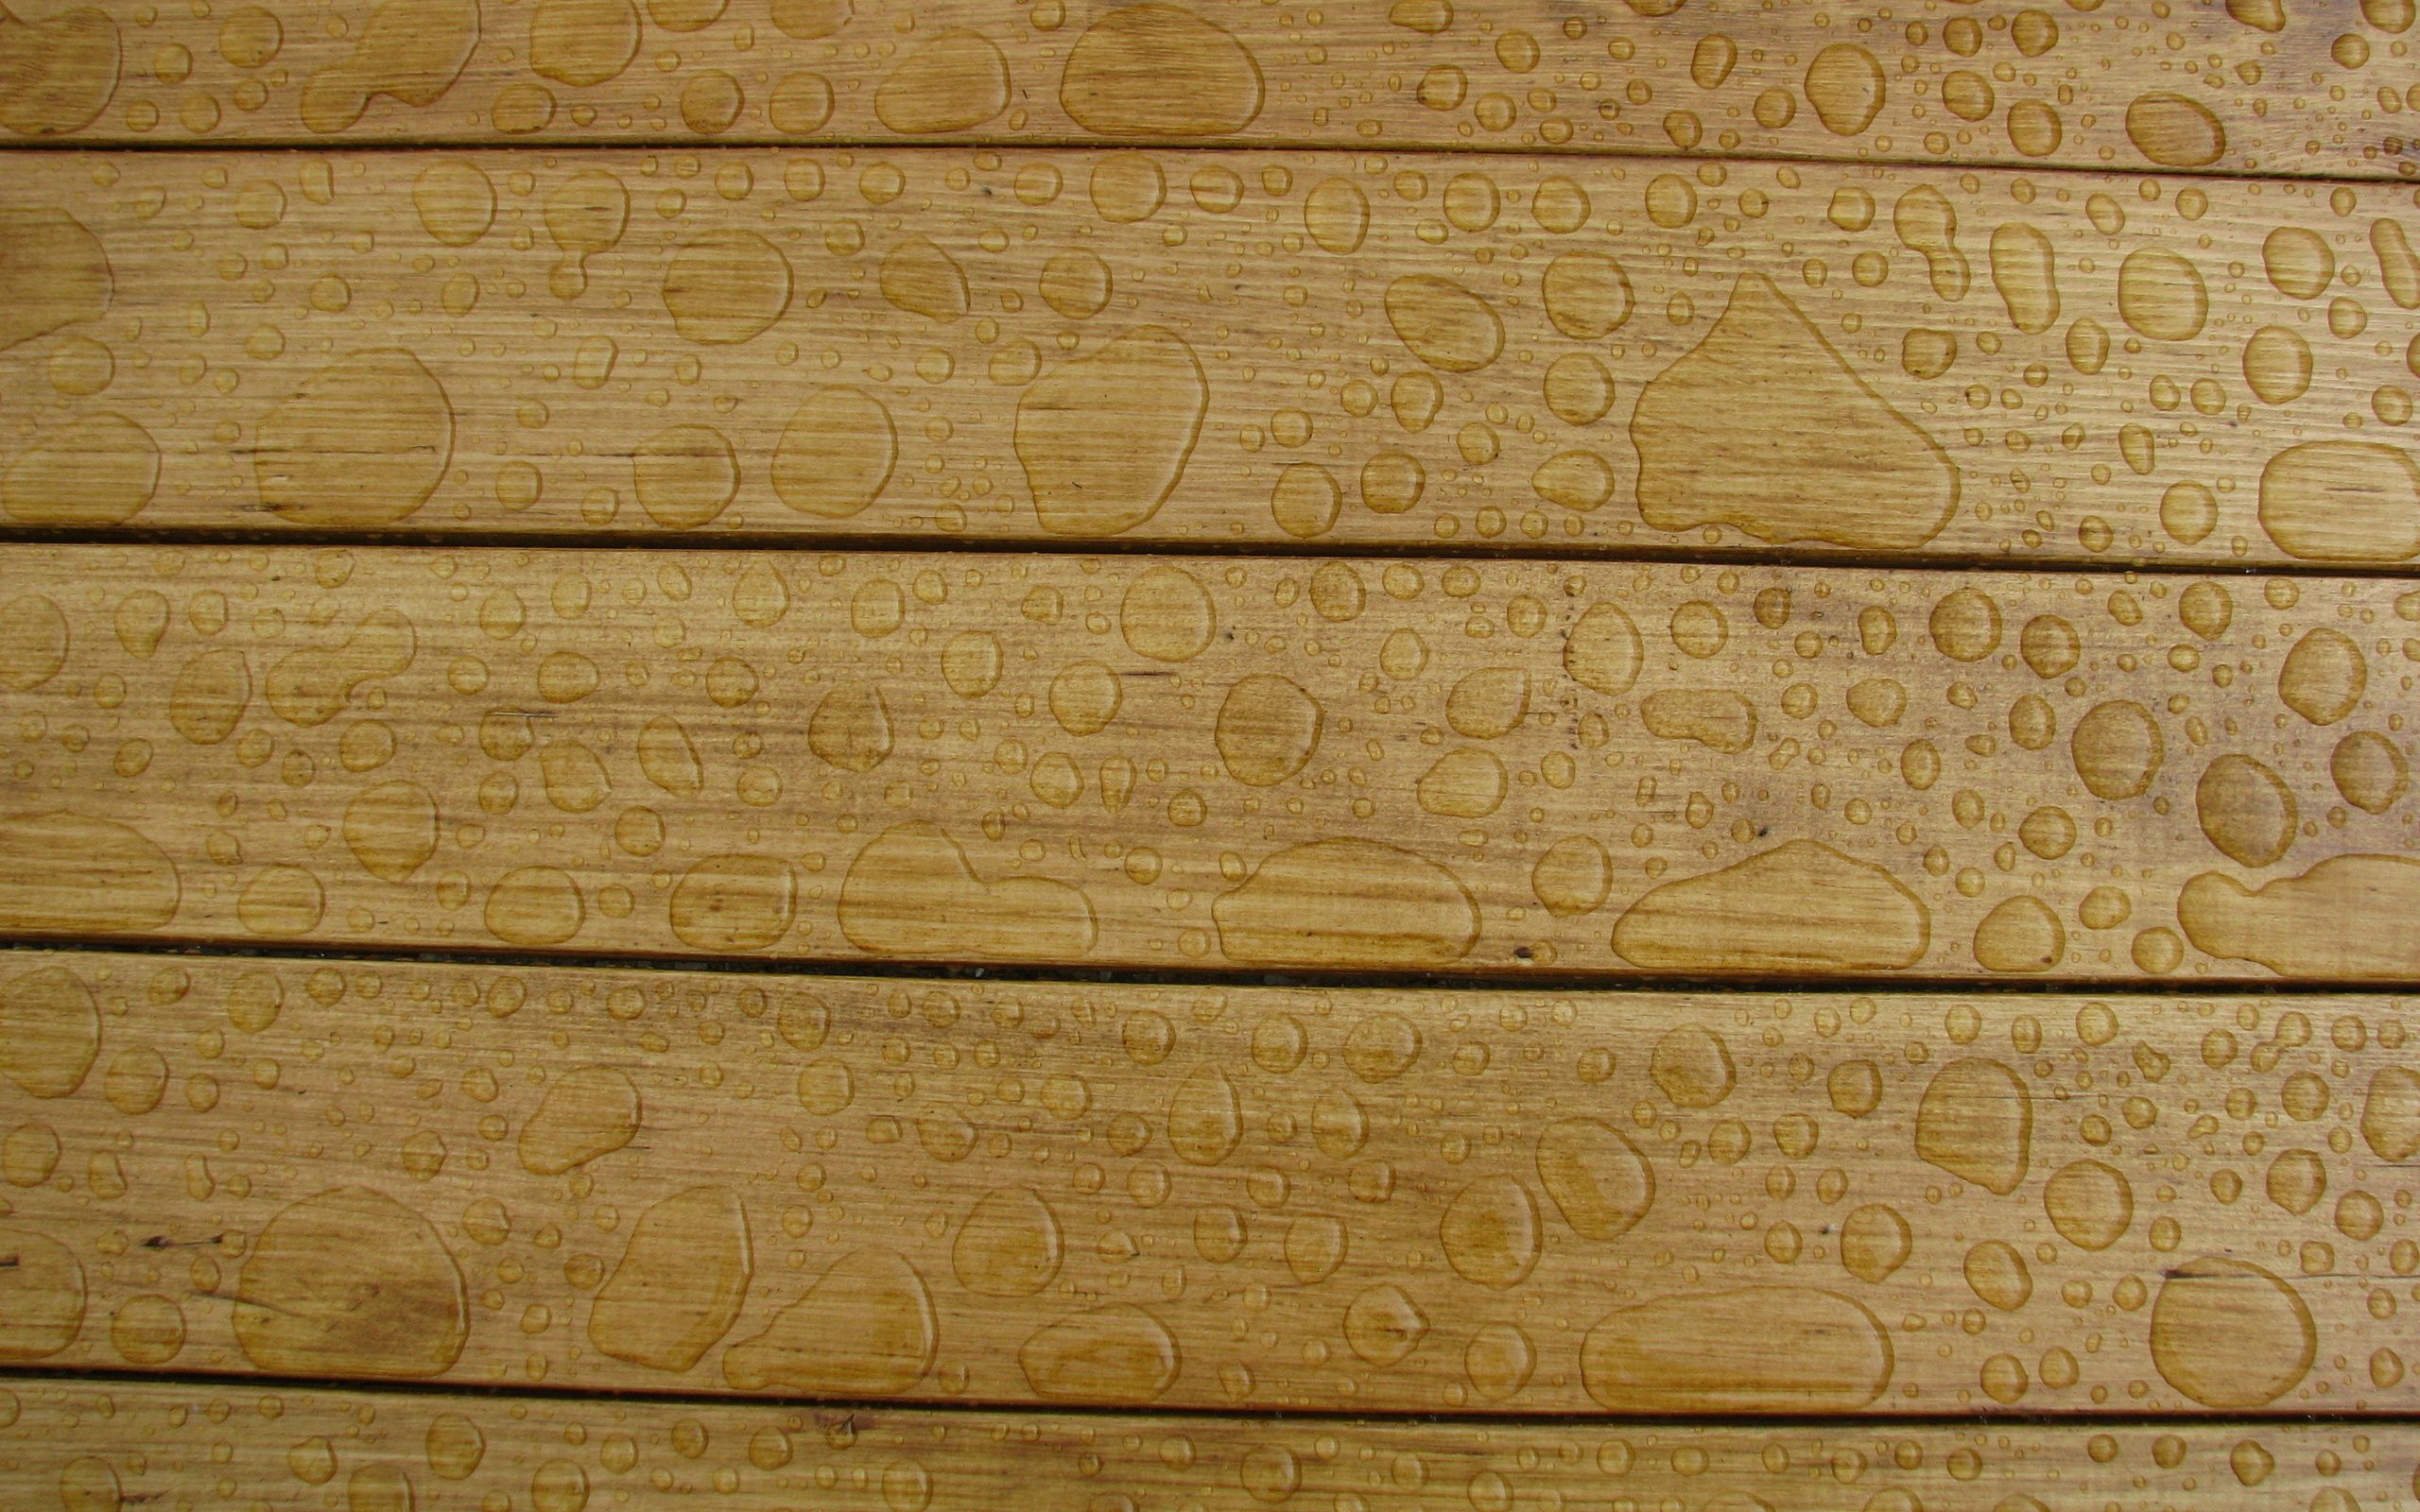 board, drops, wet, texture, textures, surface, planks, humid